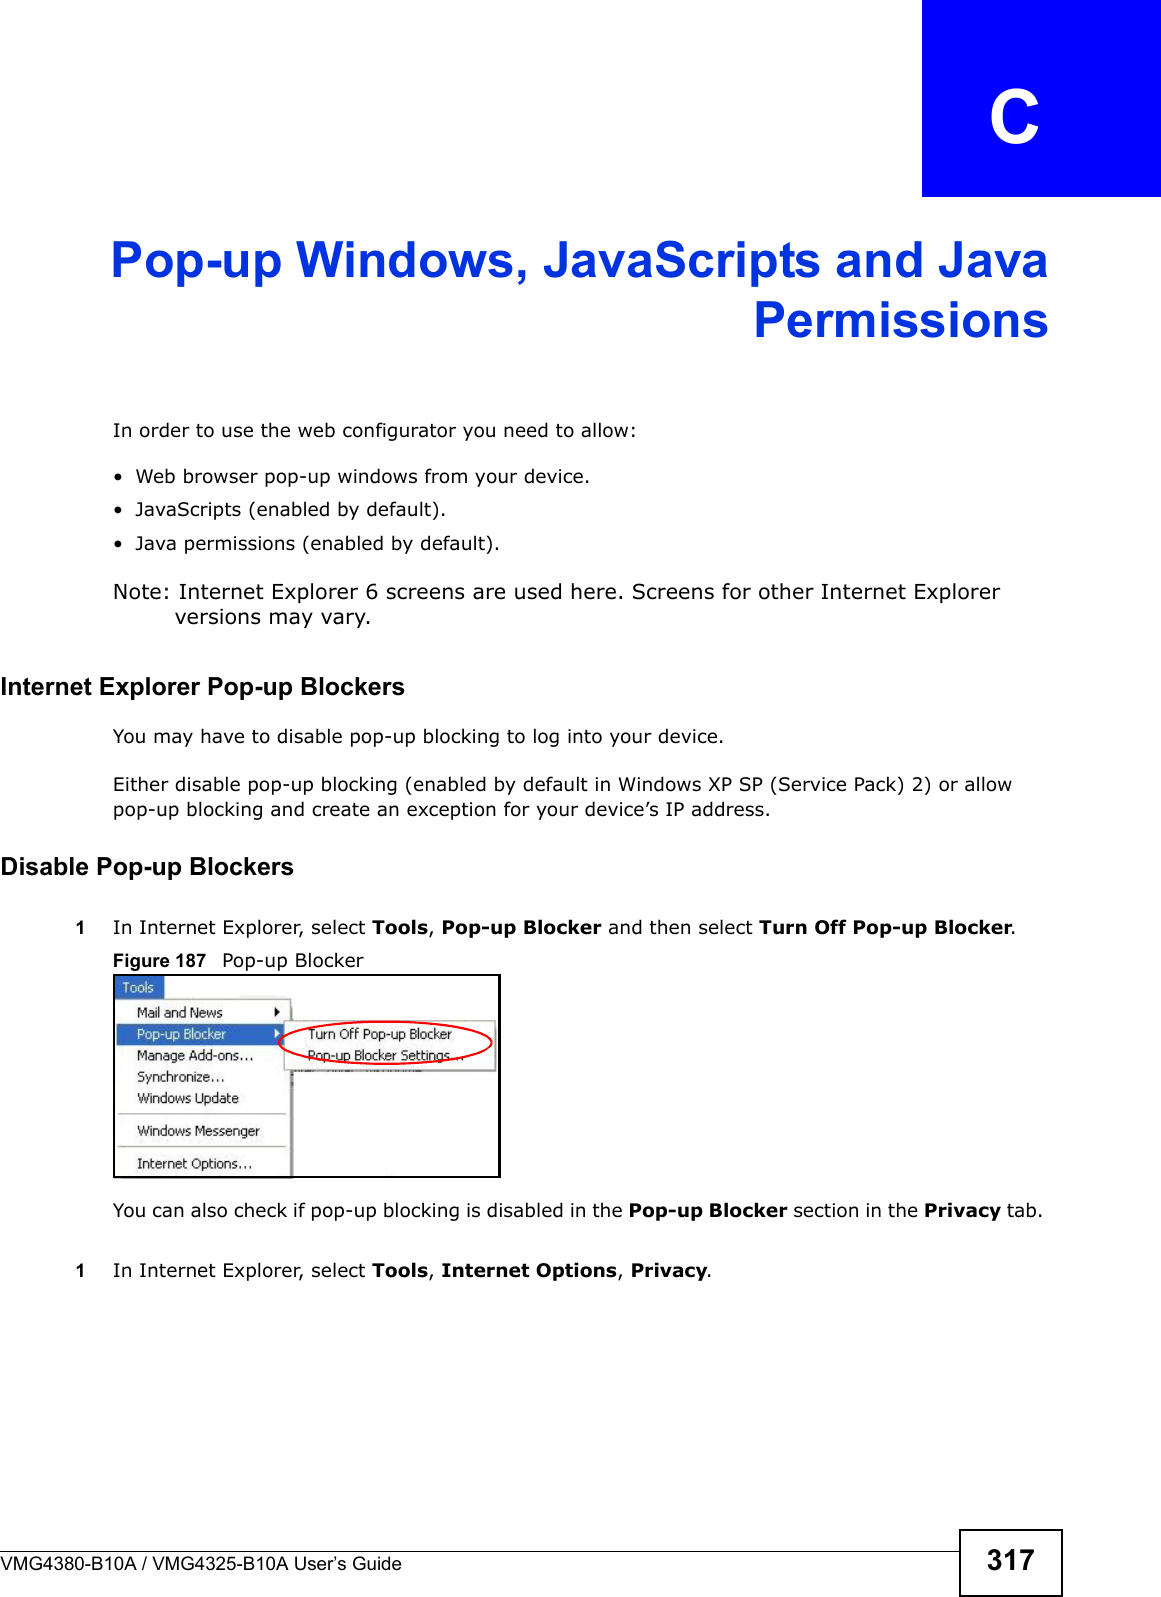 VMG4380-B10A / VMG4325-B10A User’s Guide 317APPENDIX  CPop-up Windows, JavaScripts and JavaPermissionsIn order to use the web configurator you need to allow:• Web browser pop-up windows from your device.• JavaScripts (enabled by default).• Java permissions (enabled by default).Note: Internet Explorer 6 screens are used here. Screens for other Internet Explorerversions may vary.Internet Explorer Pop-up BlockersYou may have to disable pop-up blocking to log into your device. Either disable pop-up blocking (enabled by default in Windows XP SP (Service Pack) 2) or allow pop-up blocking and create an exception for your device’s IP address.Disable Pop-up Blockers1In Internet Explorer, select Tools, Pop-up Blocker and then select Turn Off Pop-up Blocker. Figure 187   Pop-up BlockerYou can also check if pop-up blocking is disabled in the Pop-up Blocker section in the Privacy tab.1In Internet Explorer, select Tools, Internet Options, Privacy.